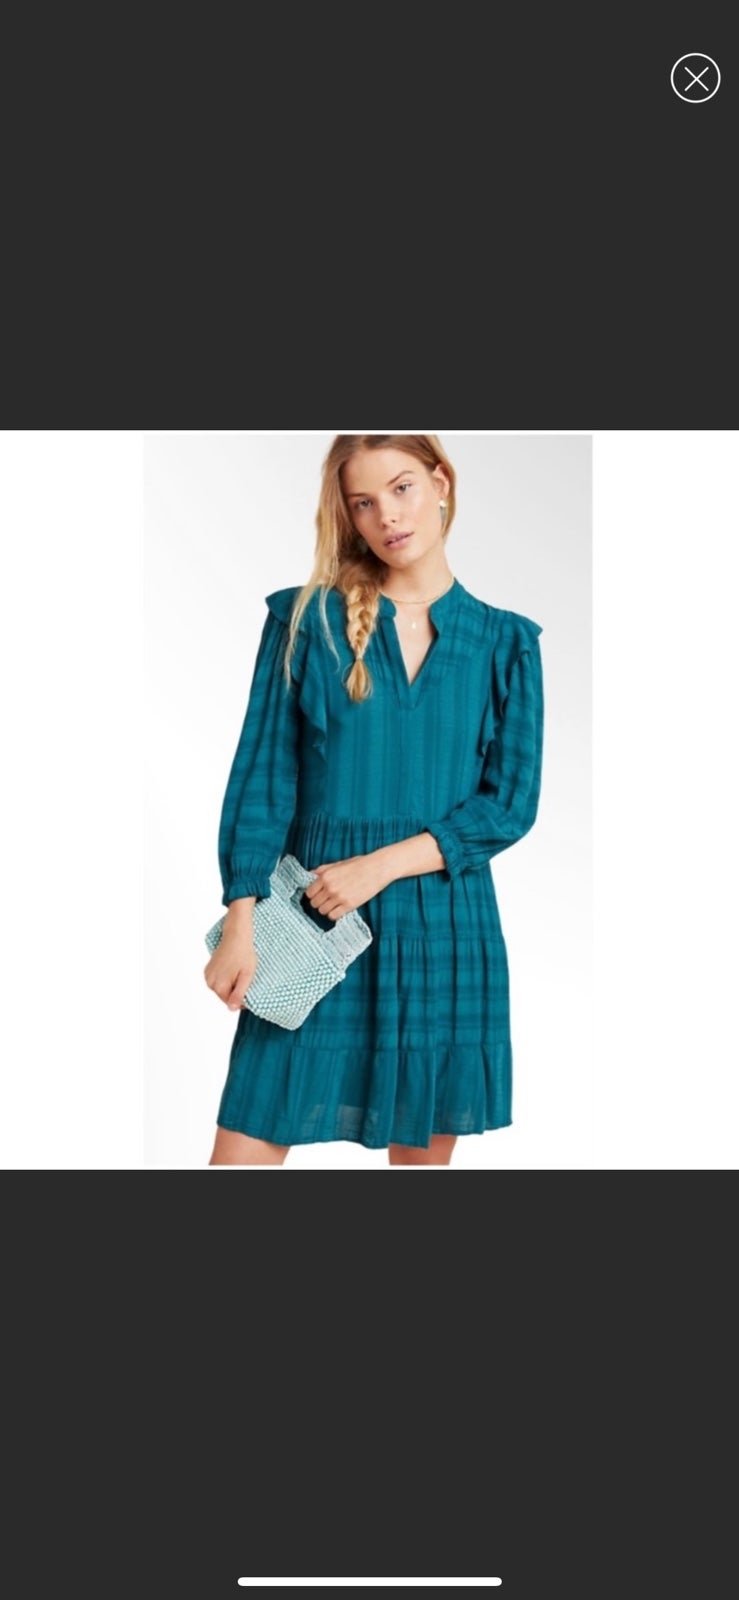 high discount Amadi tunic dress from Anthropologie hWT7OopCP on sale